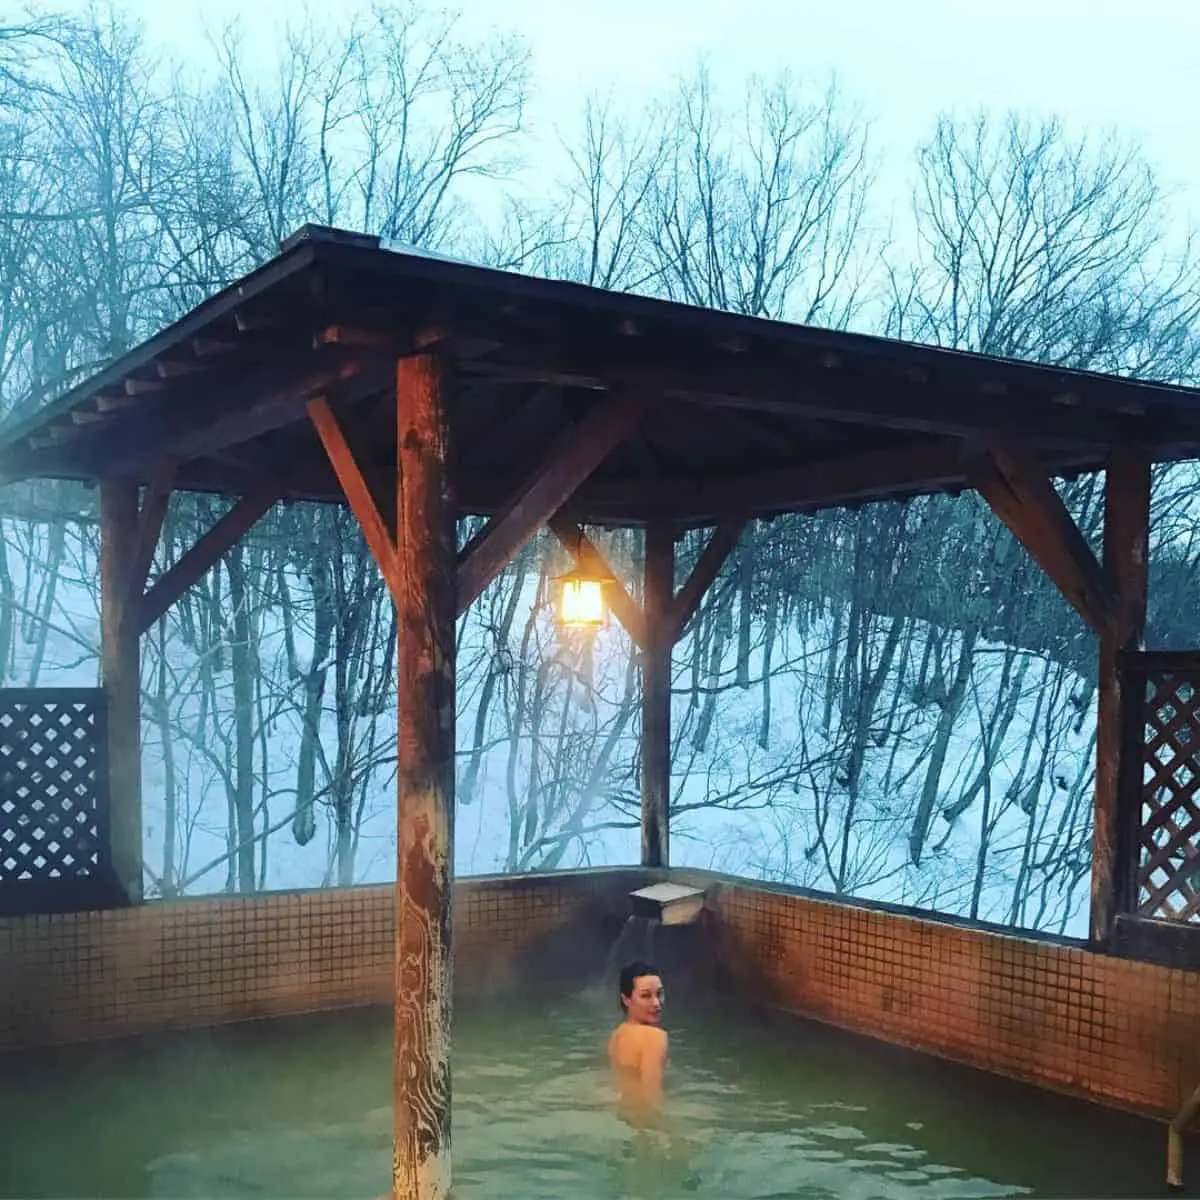 Hot spring in the middle of a Niseko forest